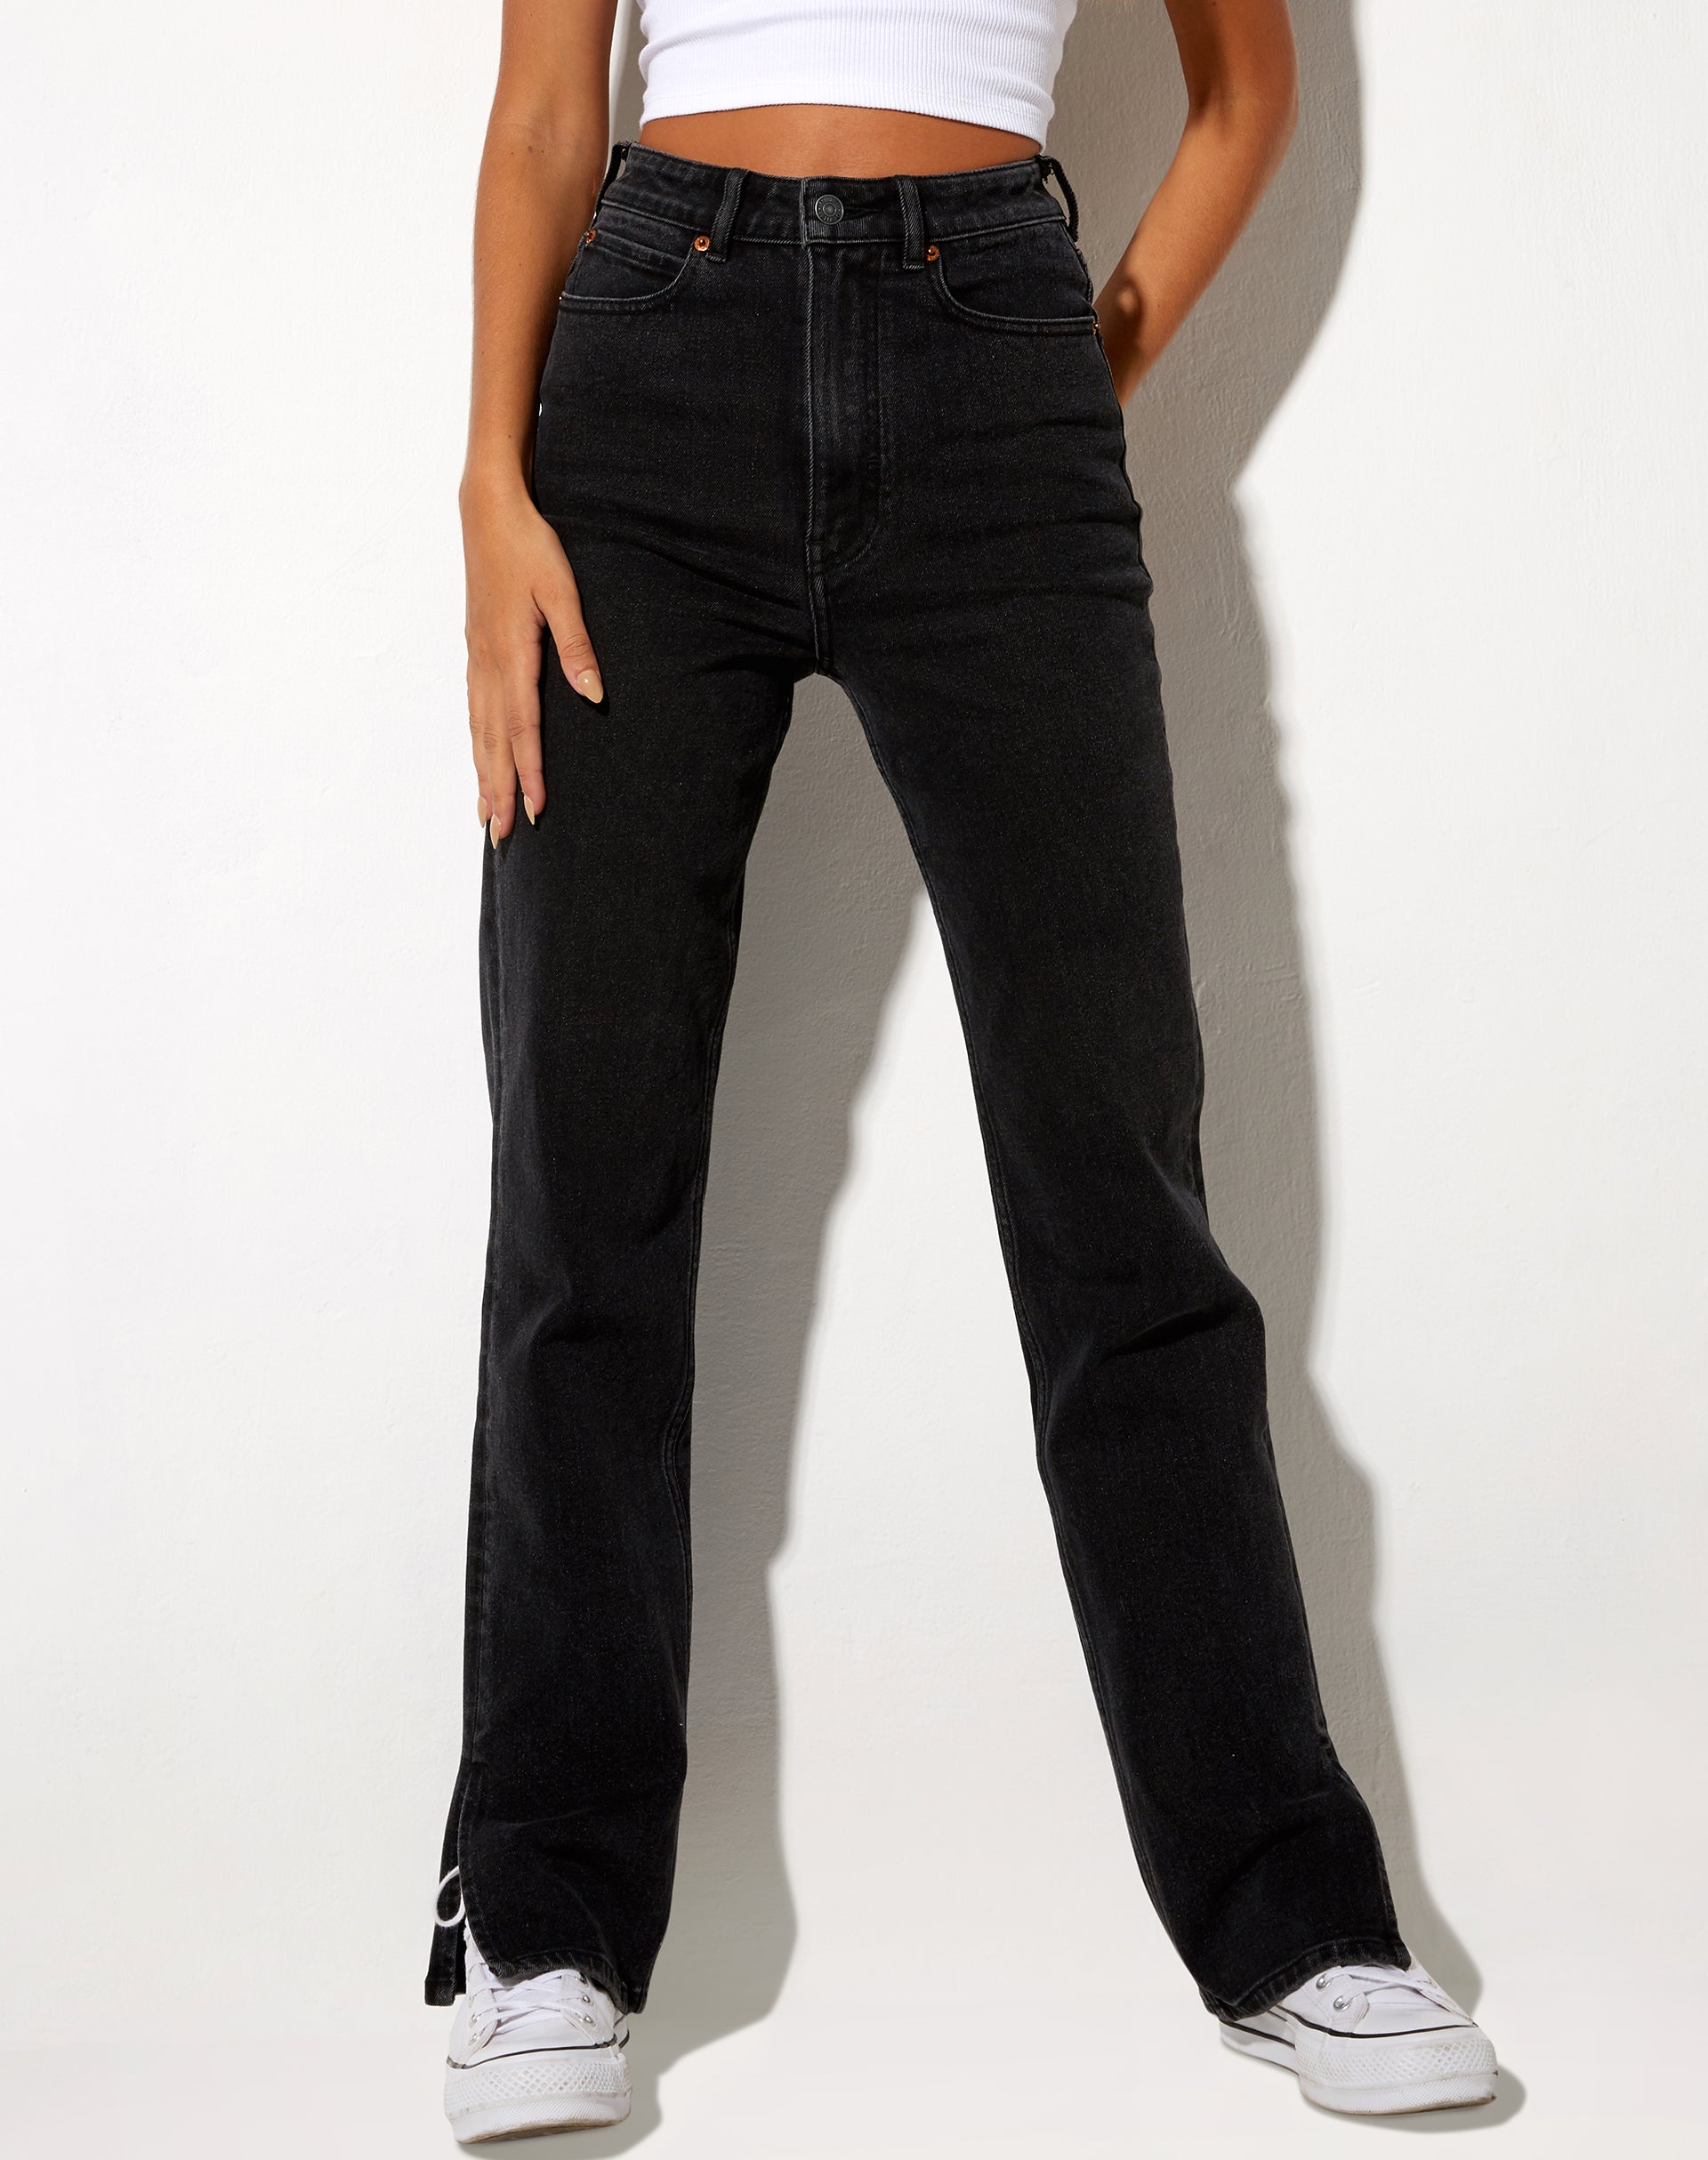 Black High Waisted Straight Jeans